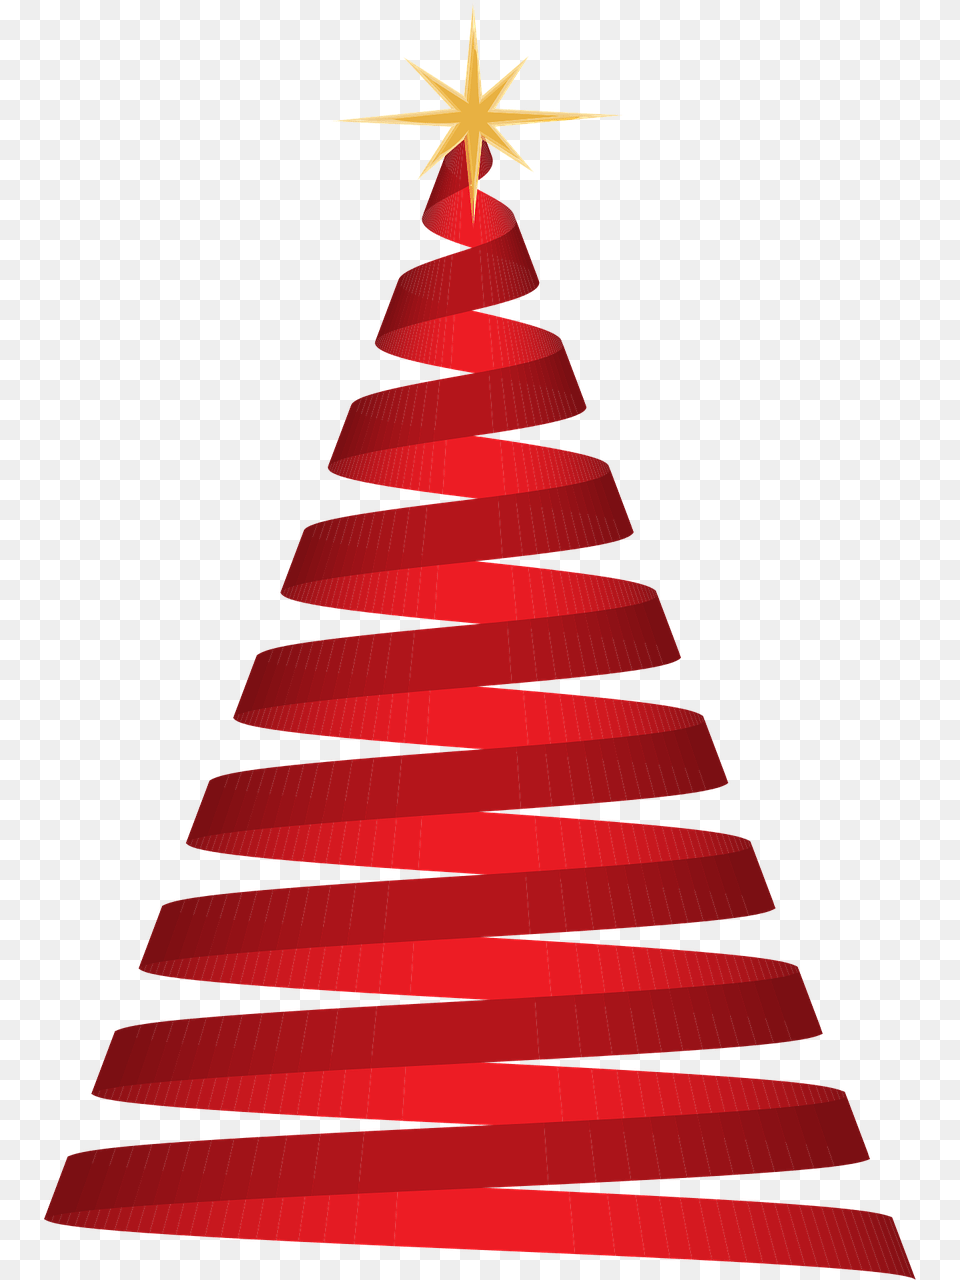 Transparent Christmas Tree Red, Christmas Decorations, Festival, Christmas Tree Png Image